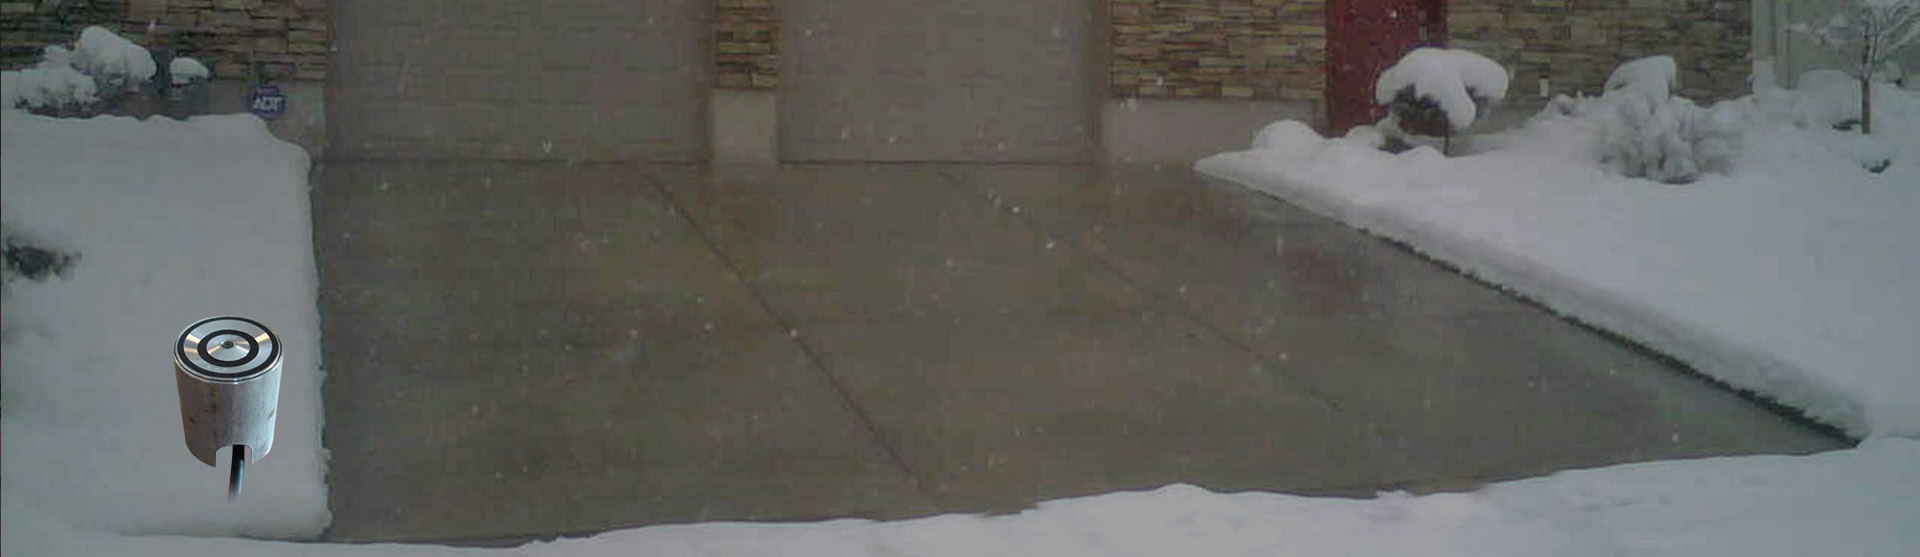 Automated heated driveways in-ground snow sensor banner